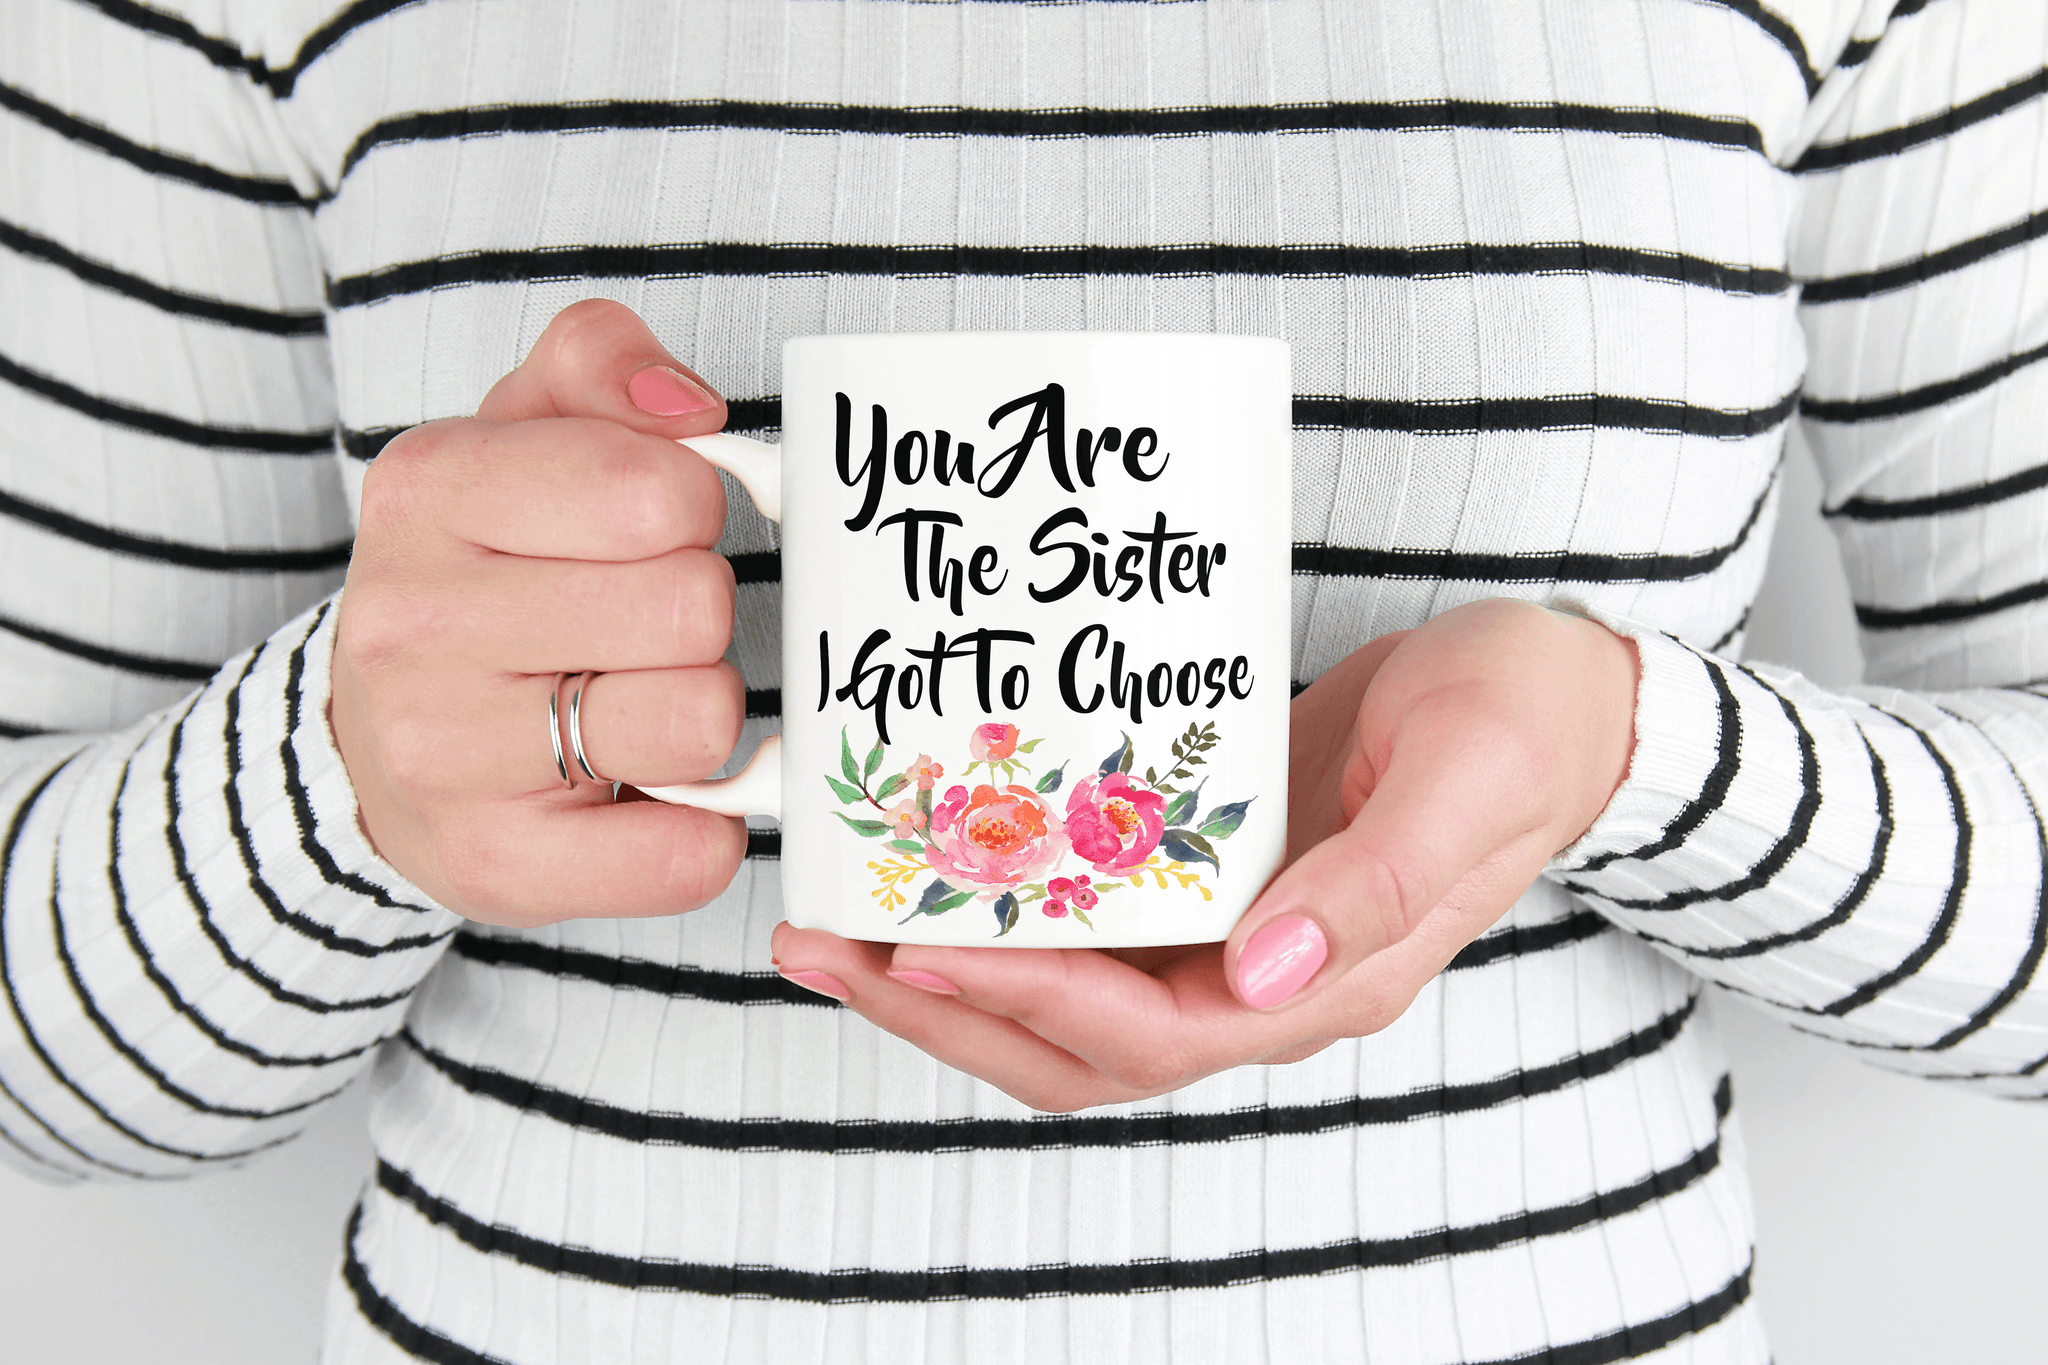 You Are The Sister I Got To Choose - Best Friend Gift – TheGiftedMug